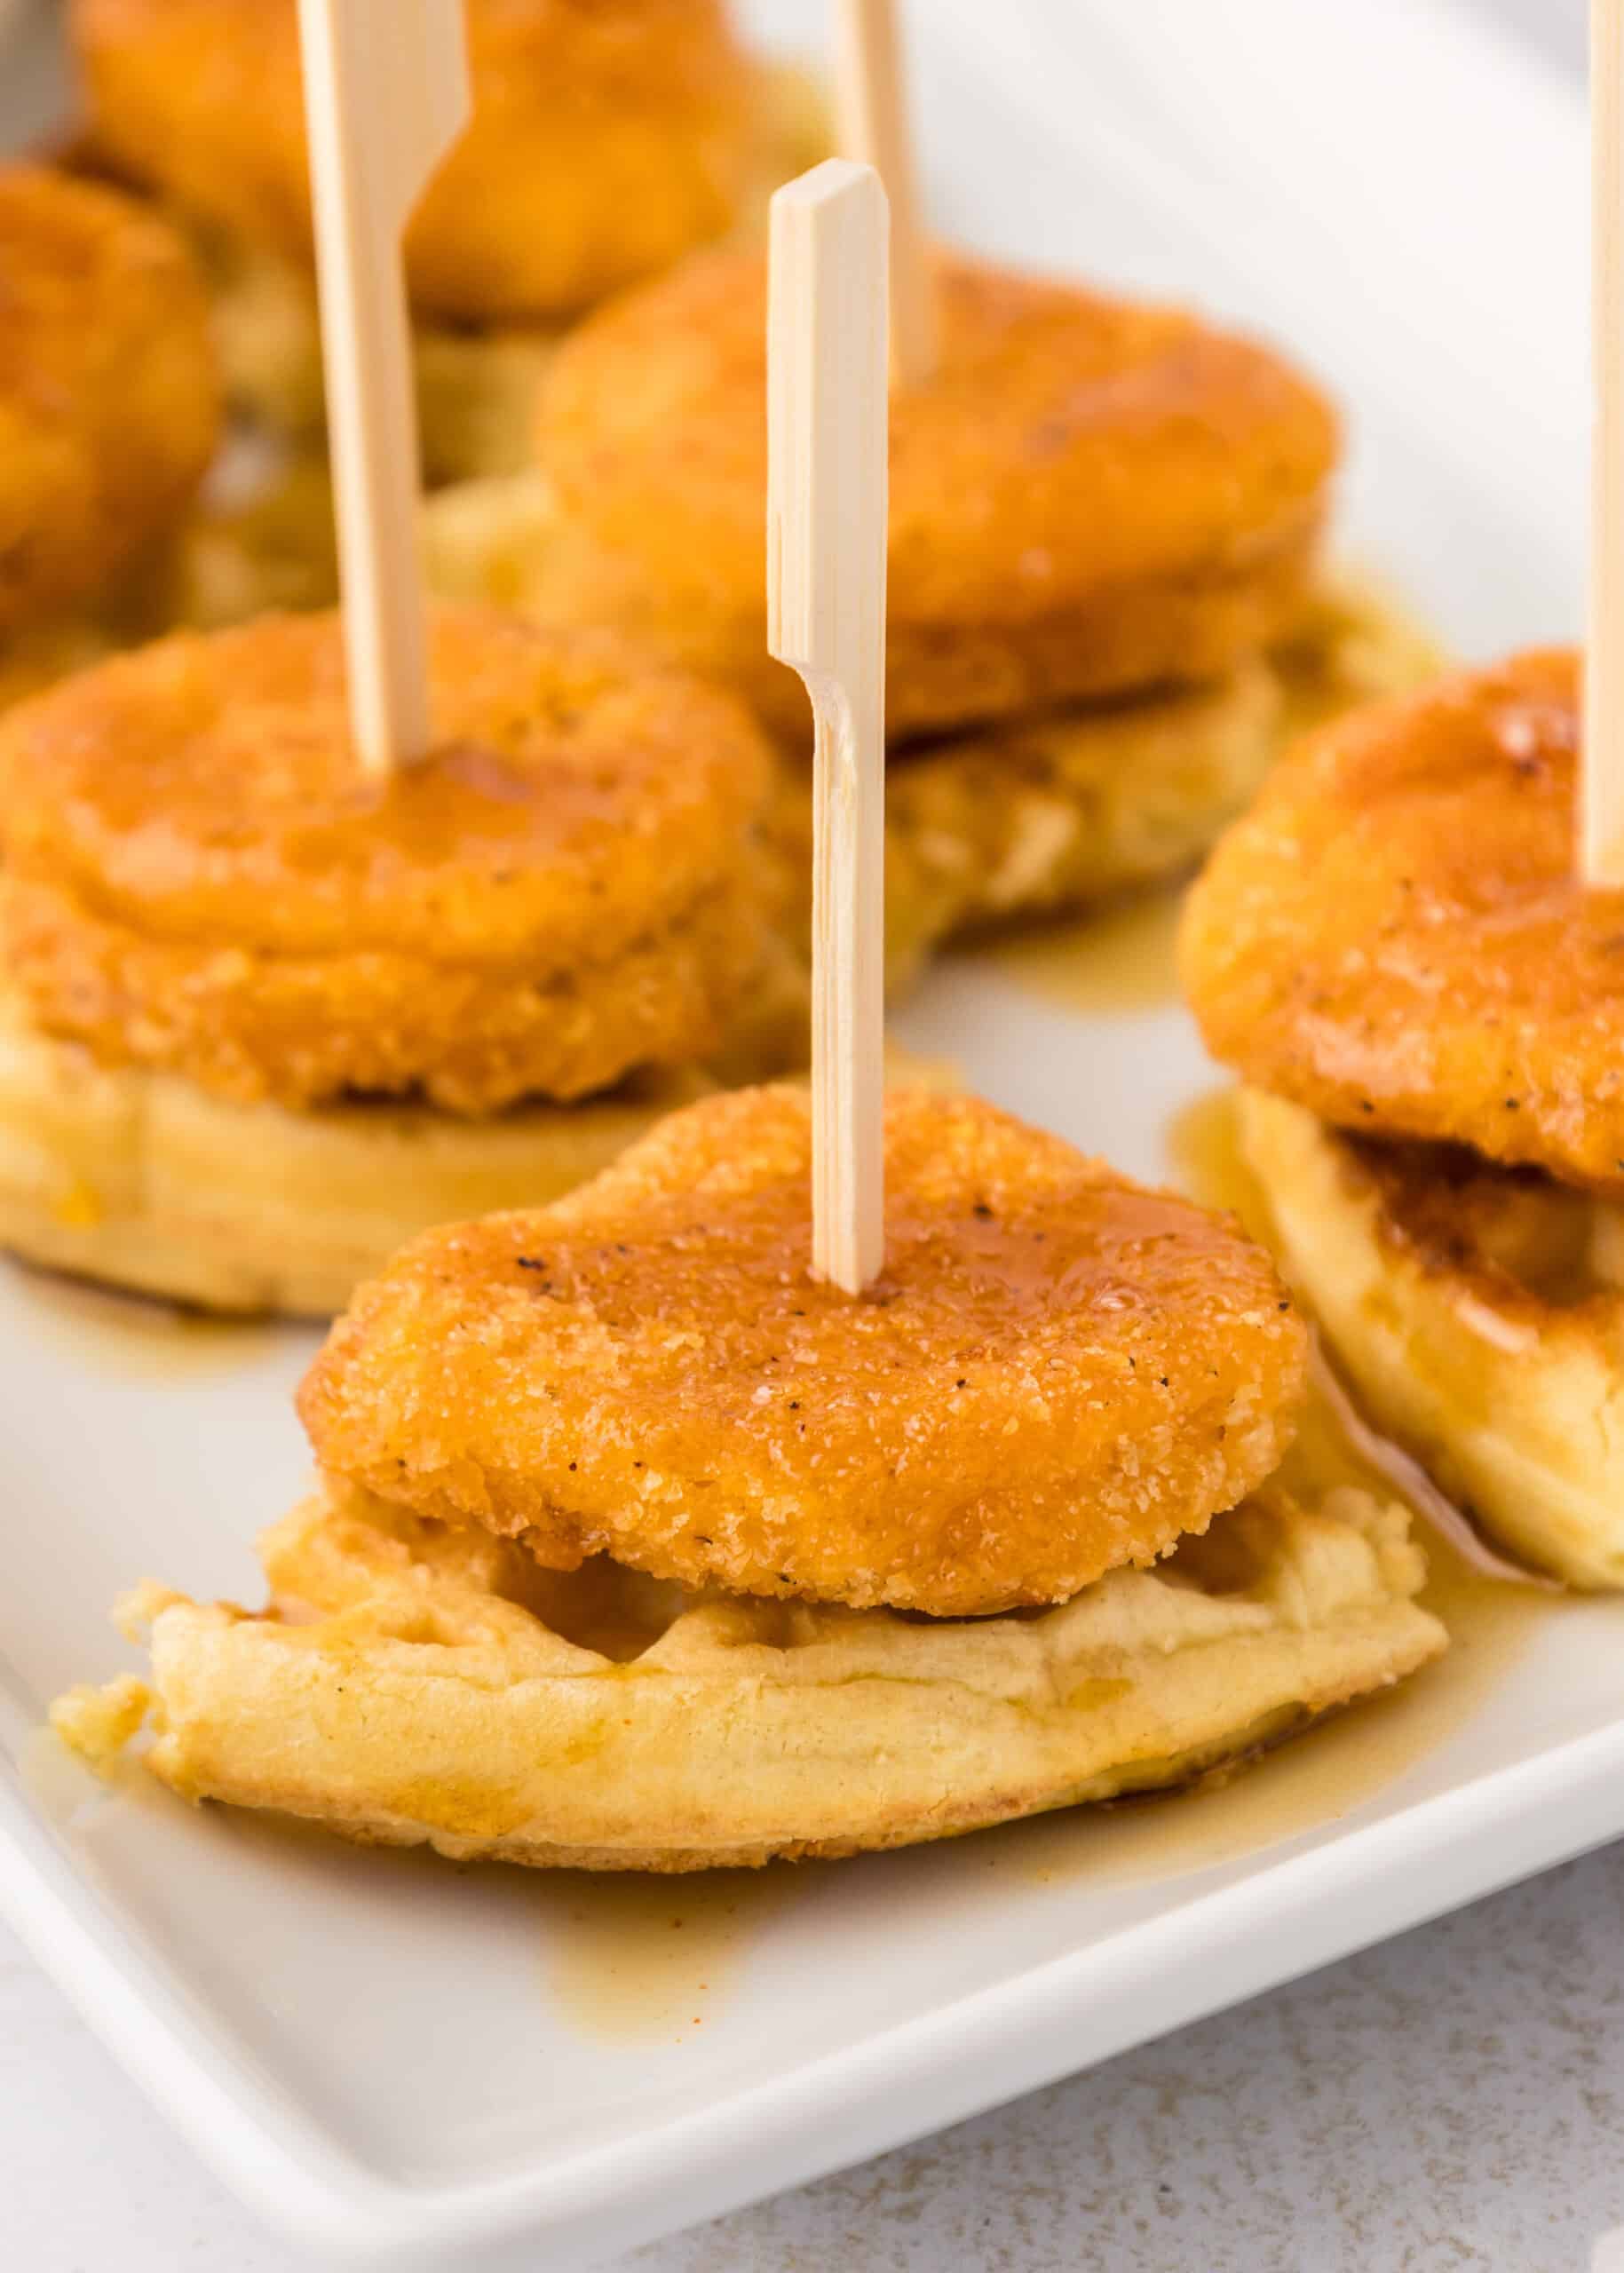 chicken and waffles appetizer (mini chicken and waffle party bites)